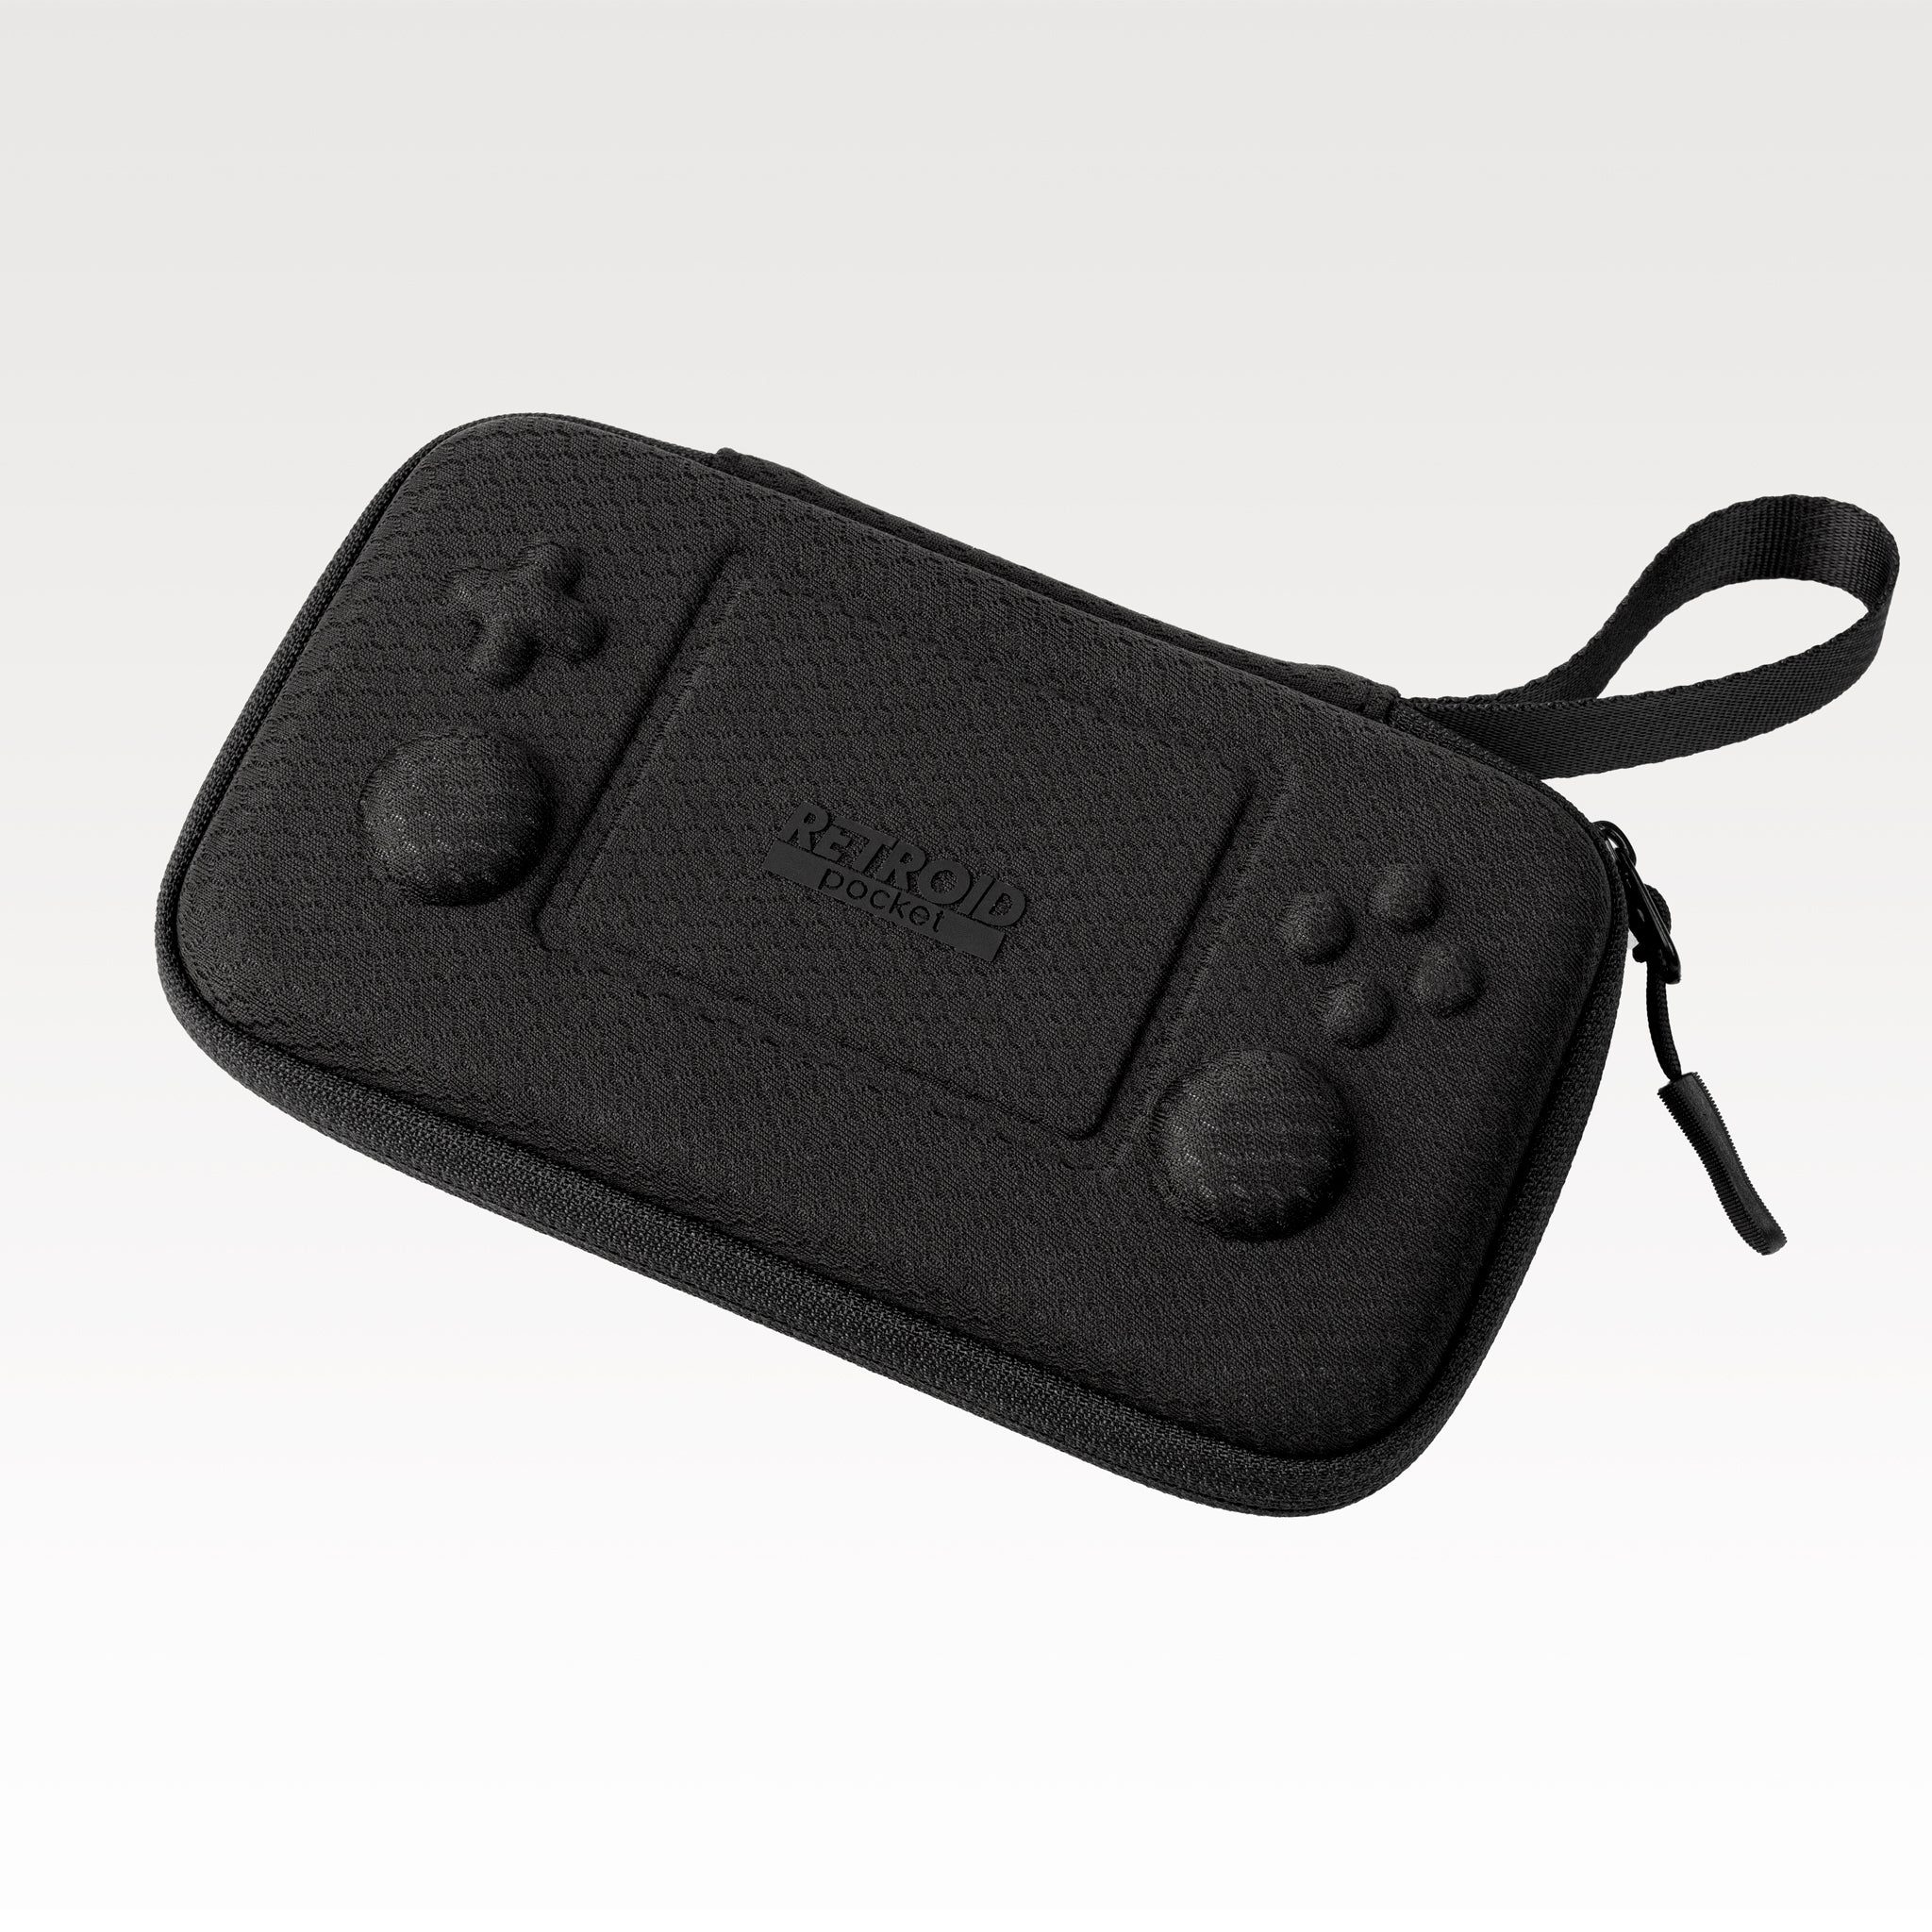 Retroid Pocket 2s Carrying Case – Mx2Games